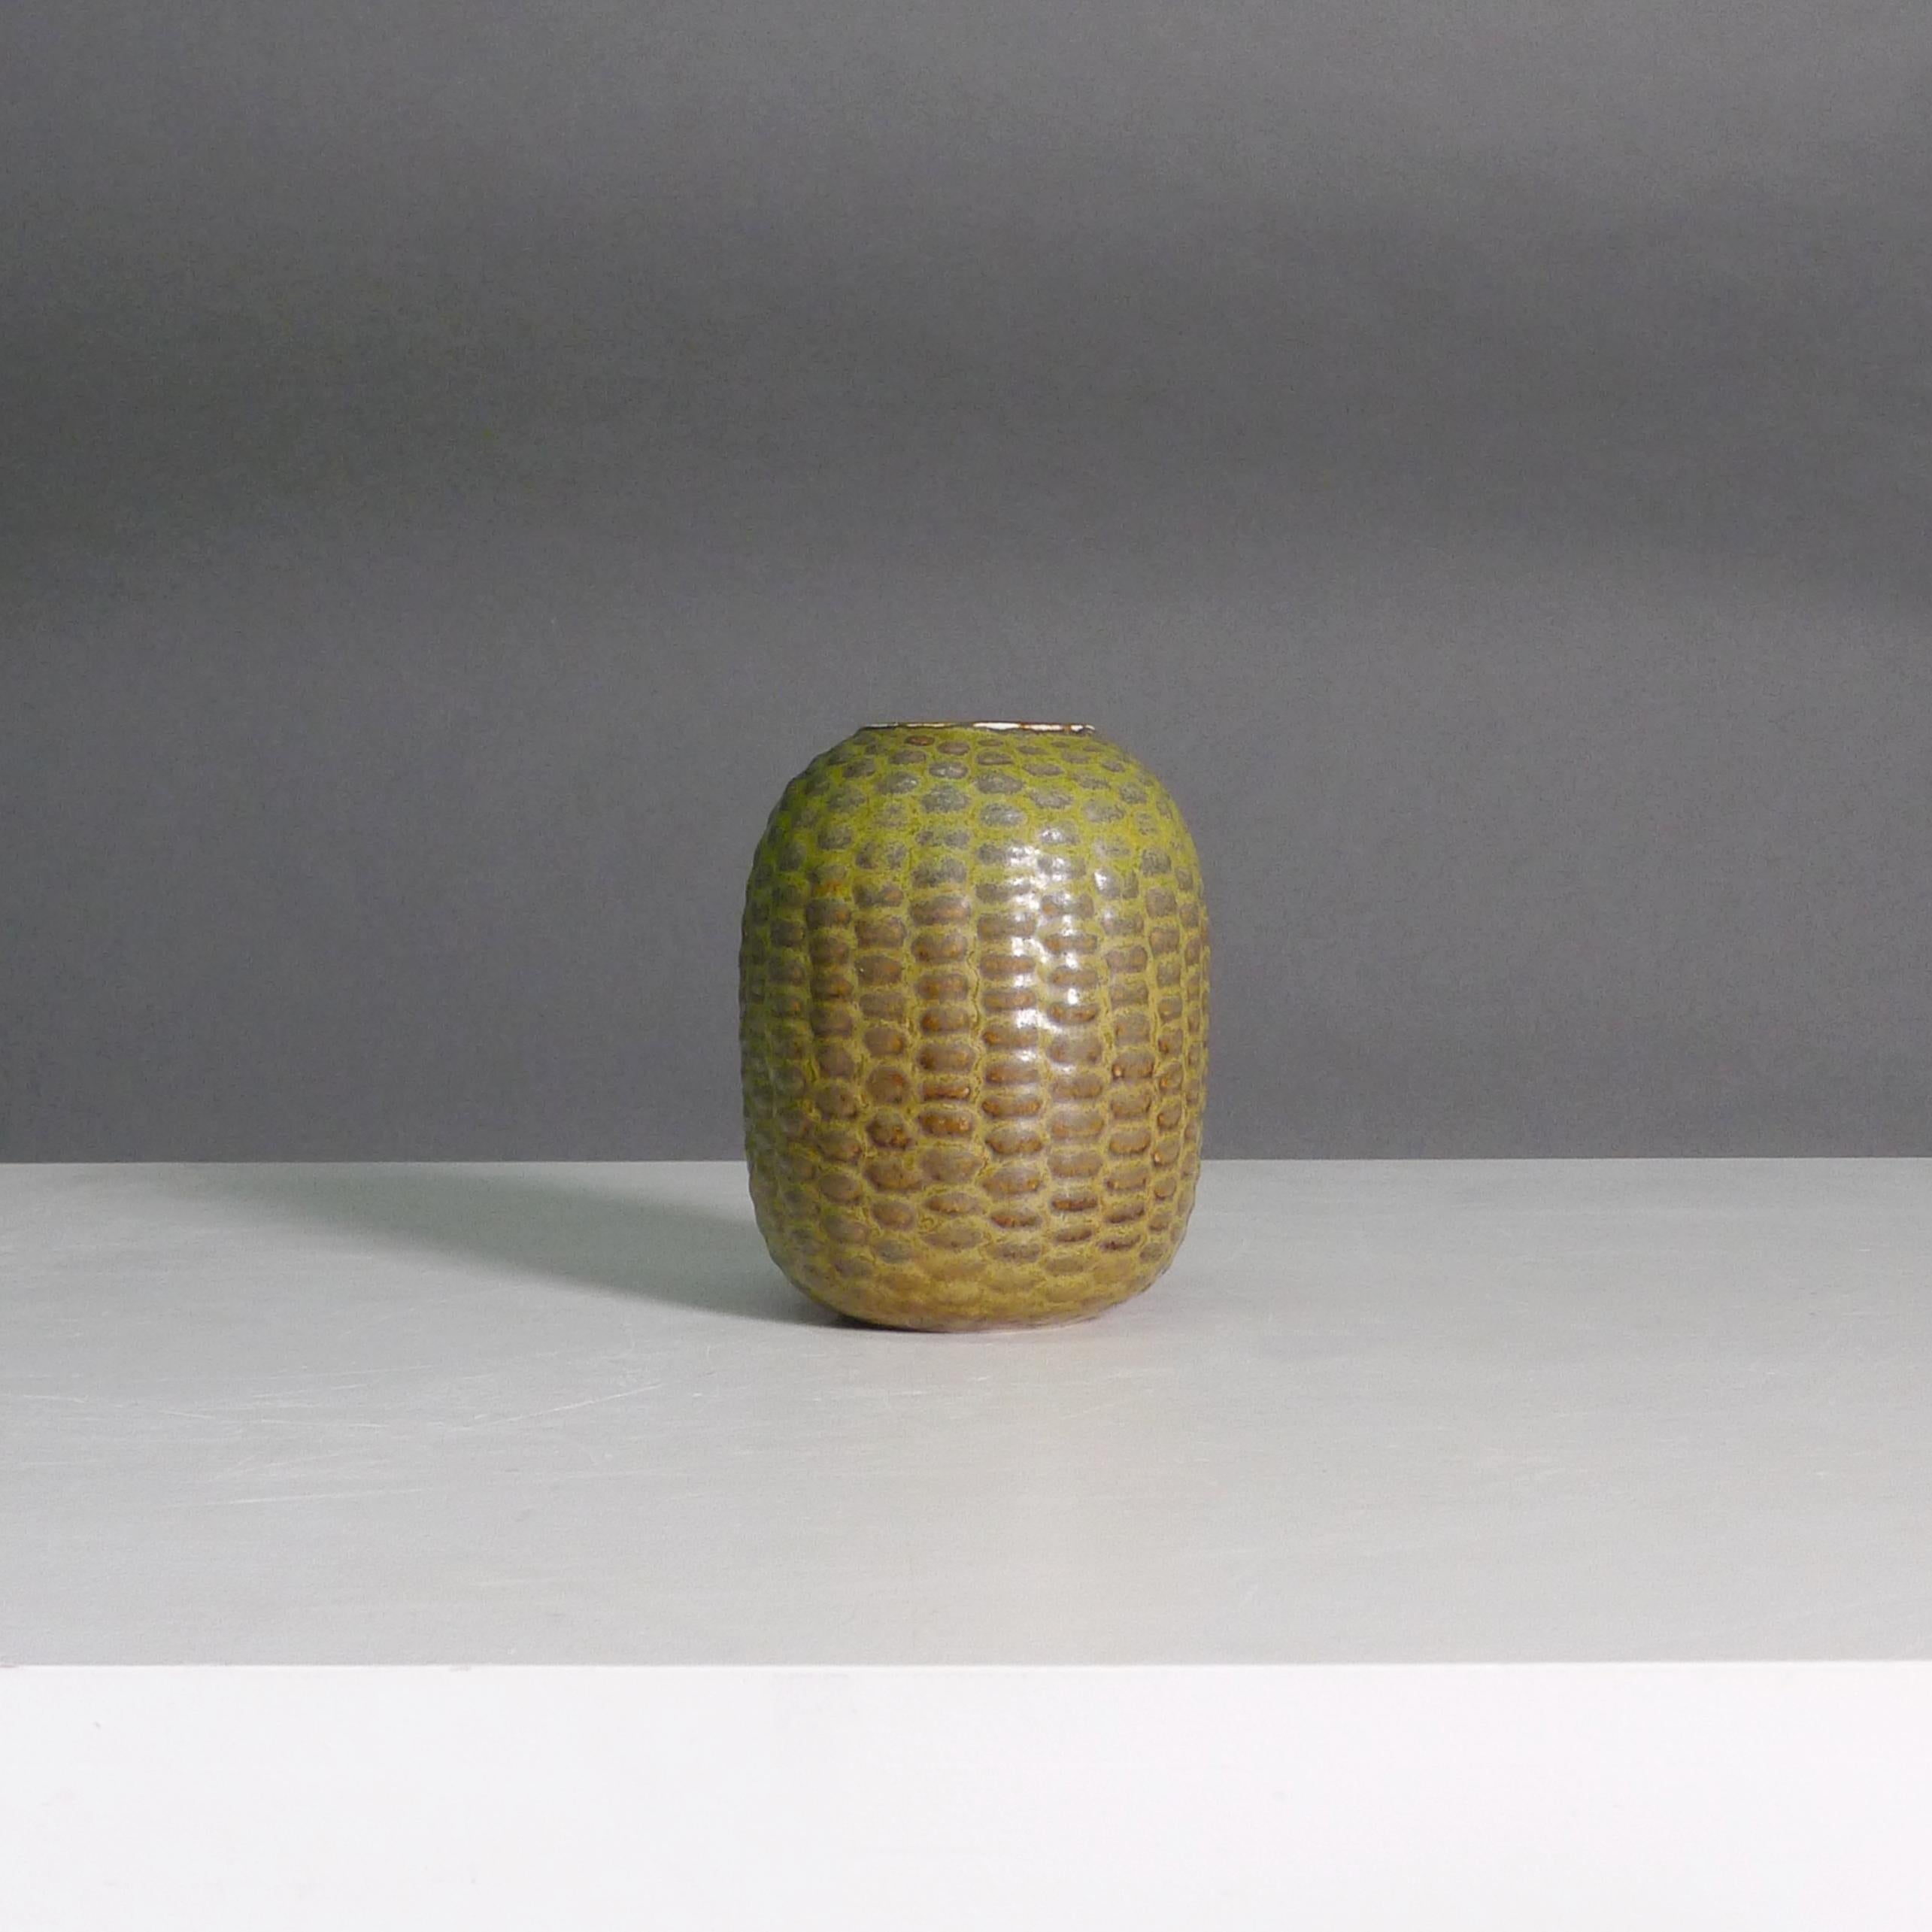 Axel Salto, Budding Vase, circa 1968 for Royal Copenhagen

Stoneware with green/brown Solfatara glaze, incised signature, painted with model number 20708 and manufacturer's mark [Denmark], and glazed three line wave mark to underside, indicating it